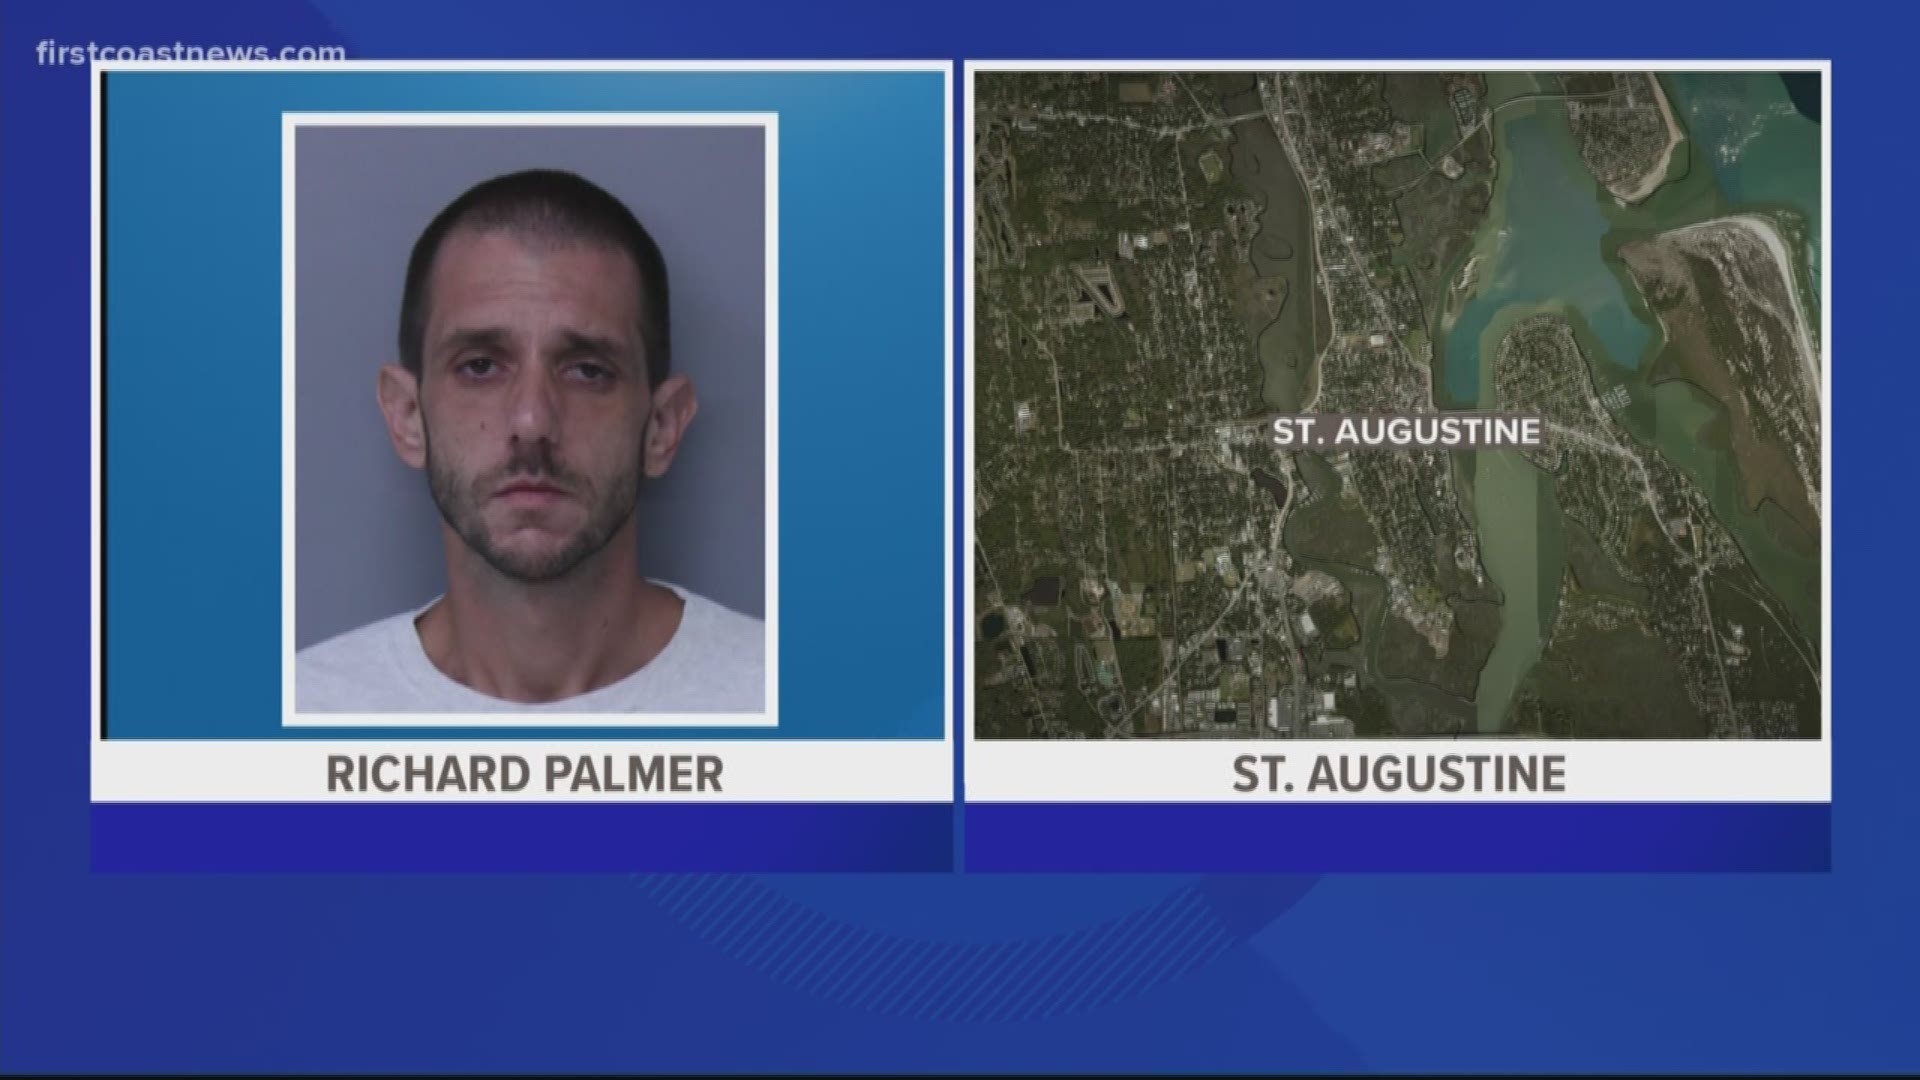 A man who allegedly had a knife and over a dozen counterfeit $100 bills was arrested over the weekend following a stabbing in Downtown St. Augustine.